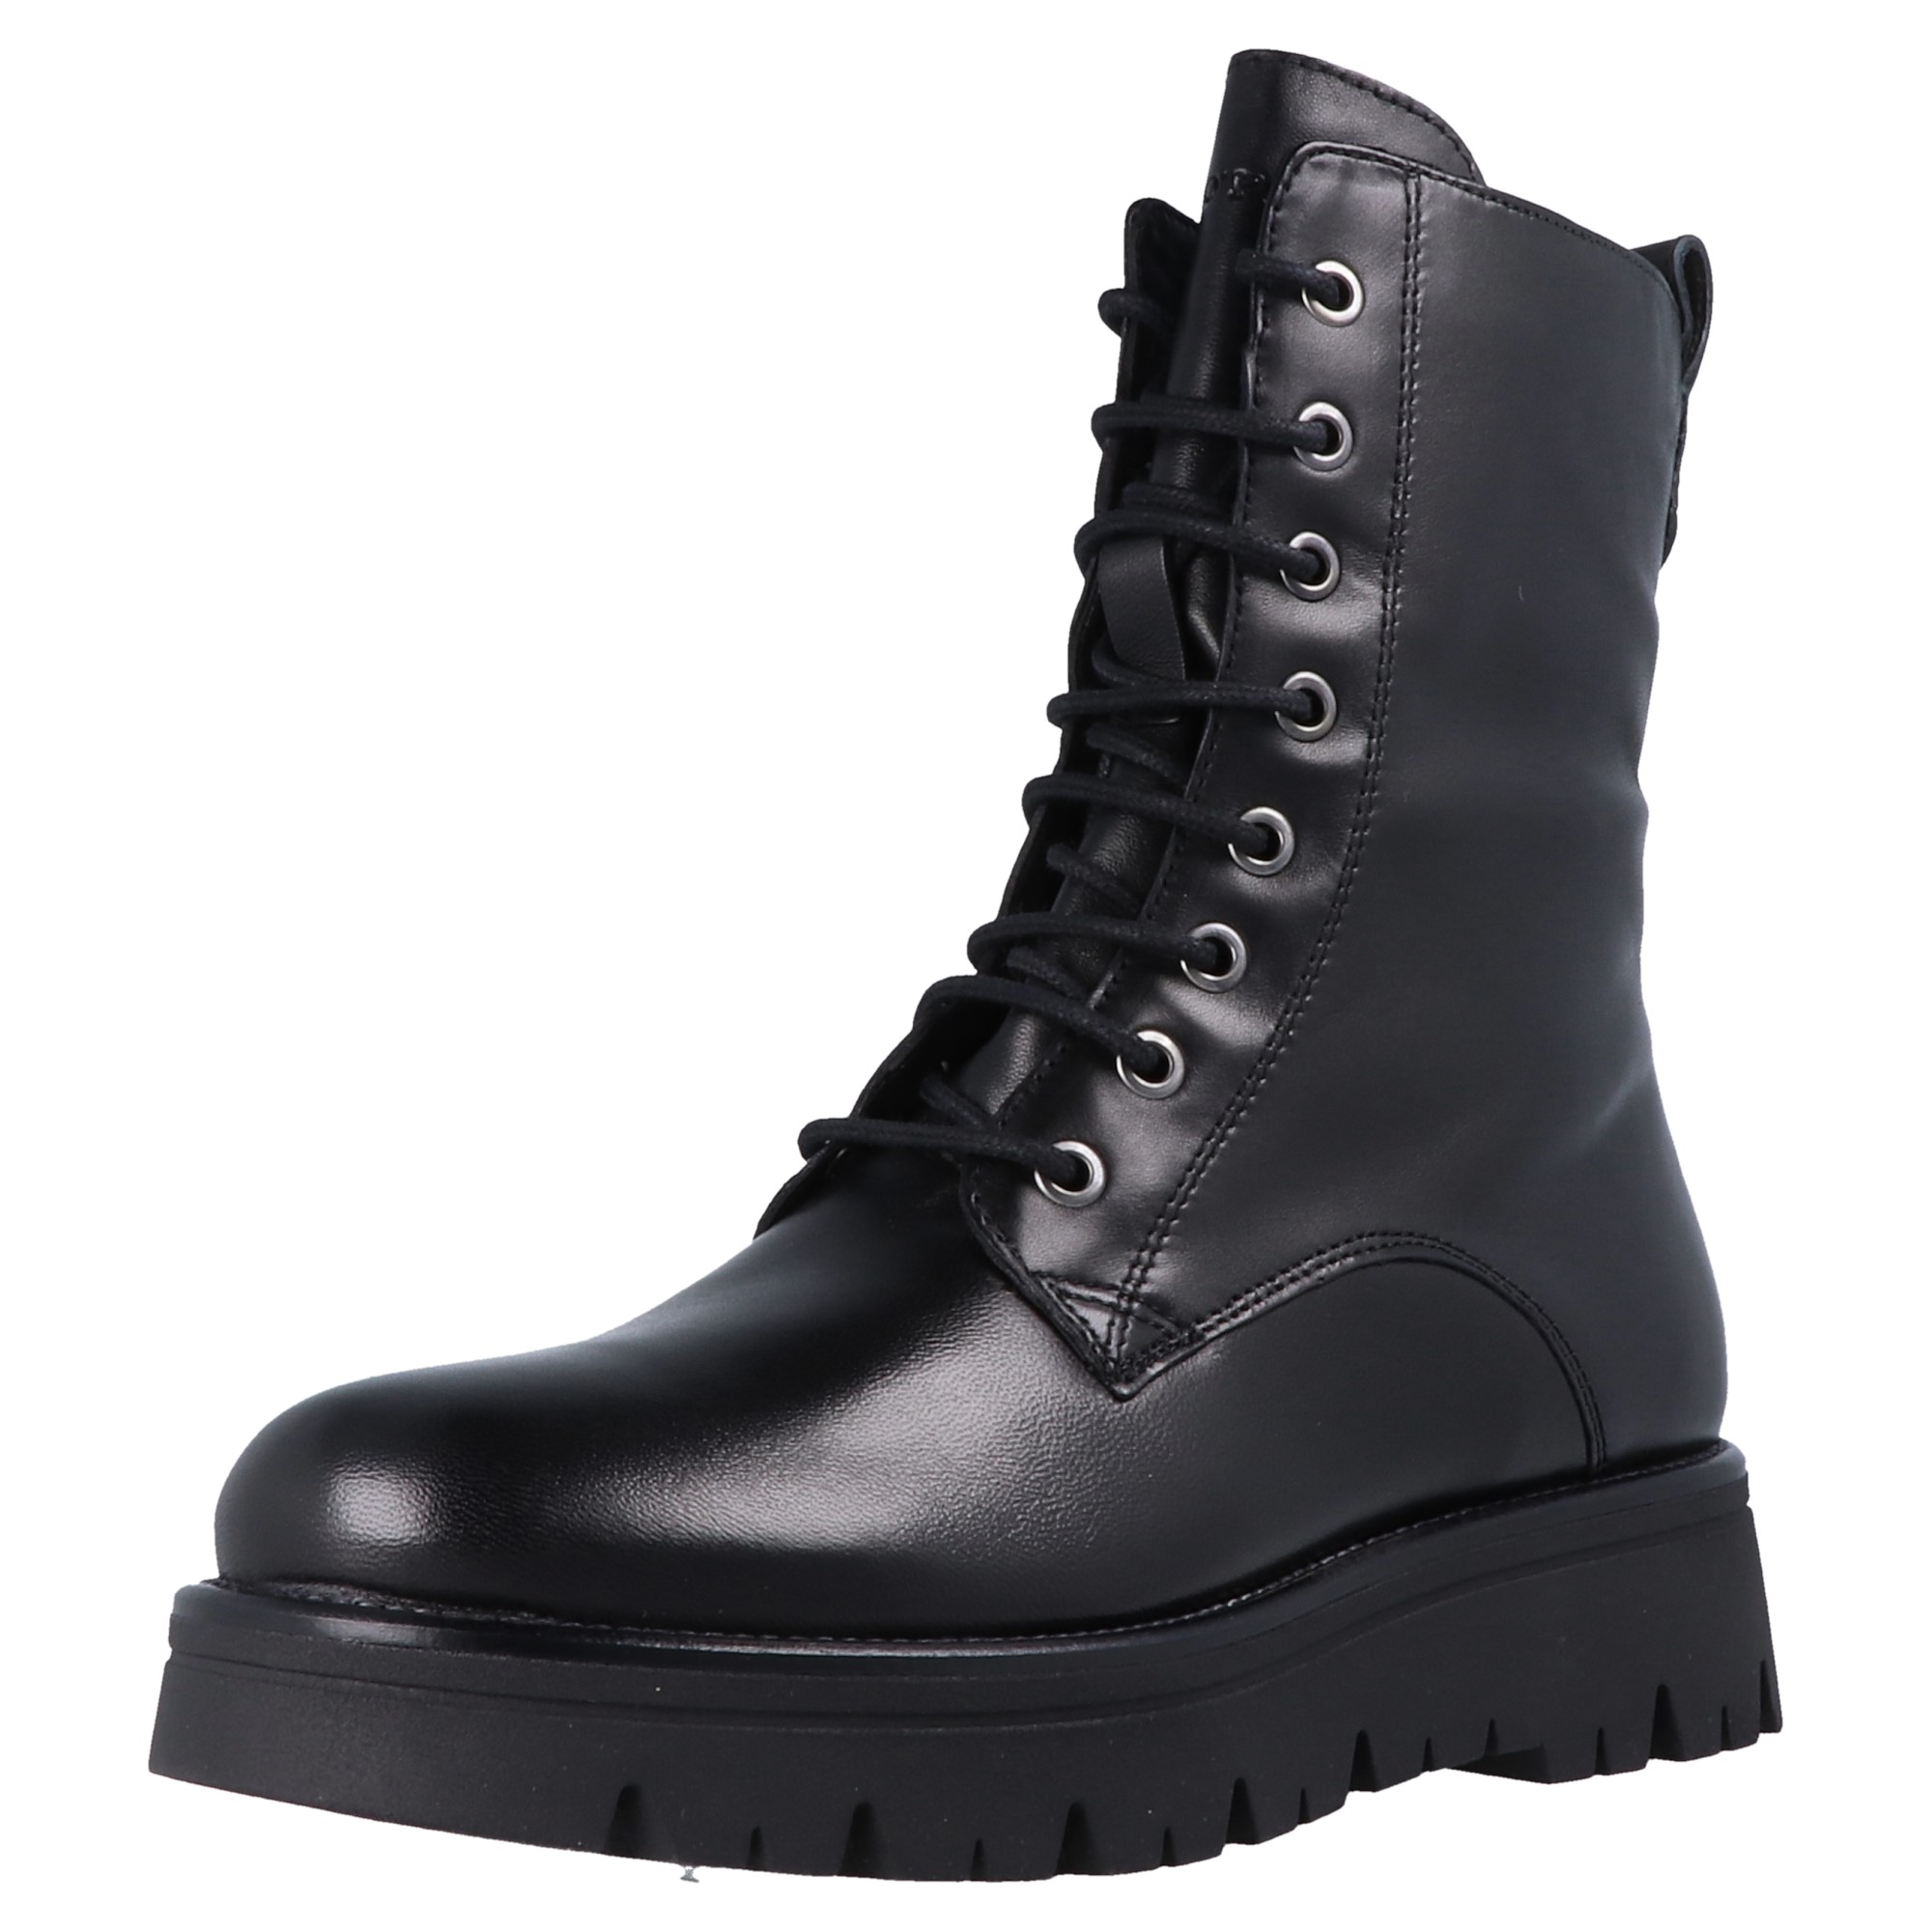 Cleo 2A - Boots